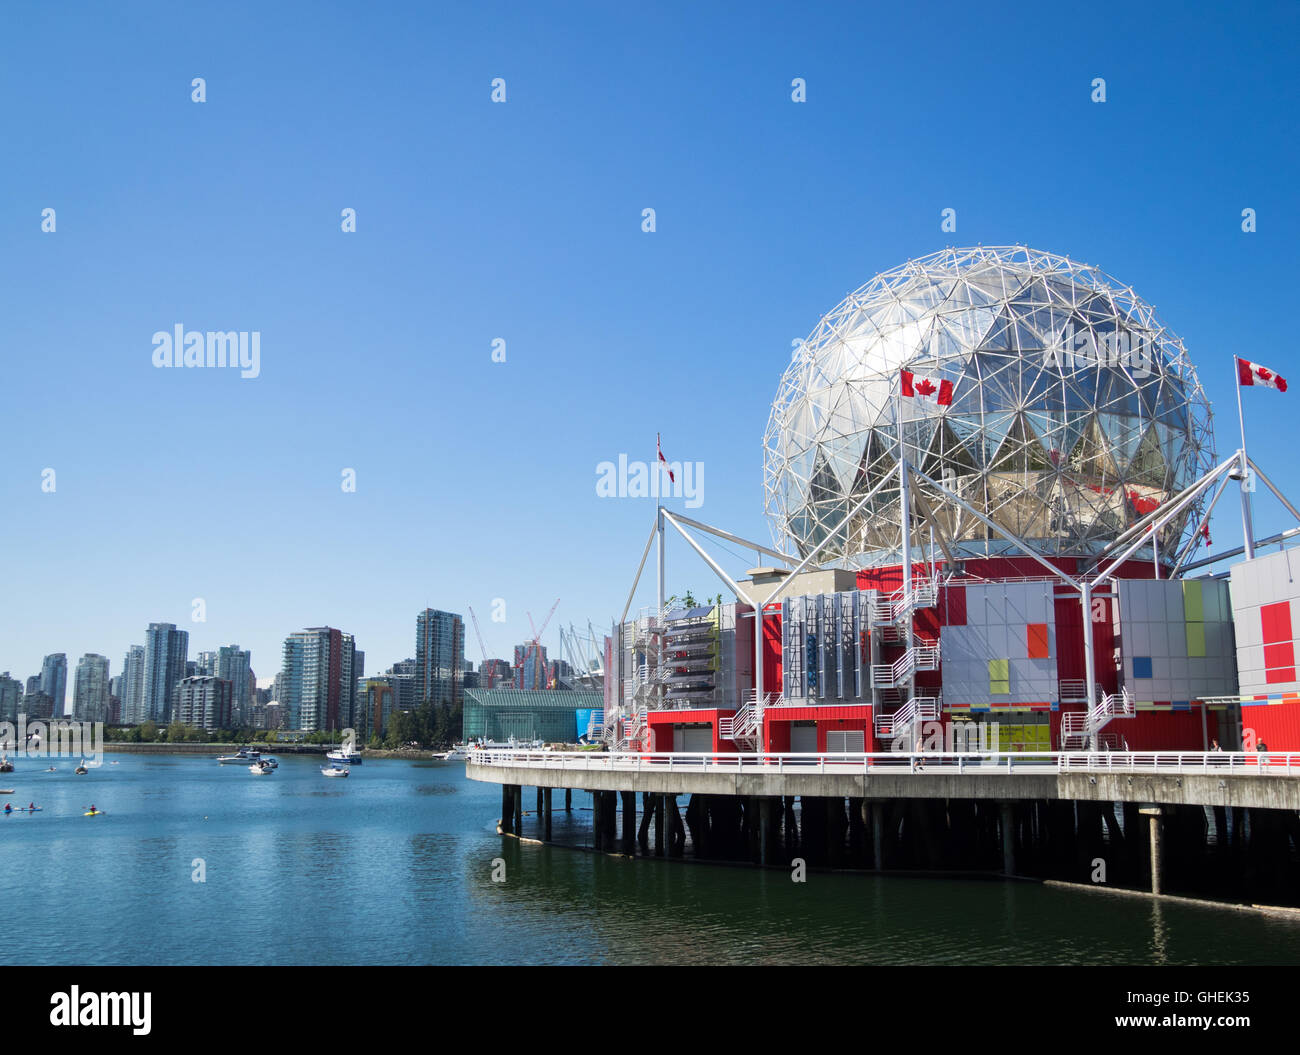 A view of Science World at Telus World of Science, a spectacular science centre on False Creek in Vancouver, Canada. Stock Photo